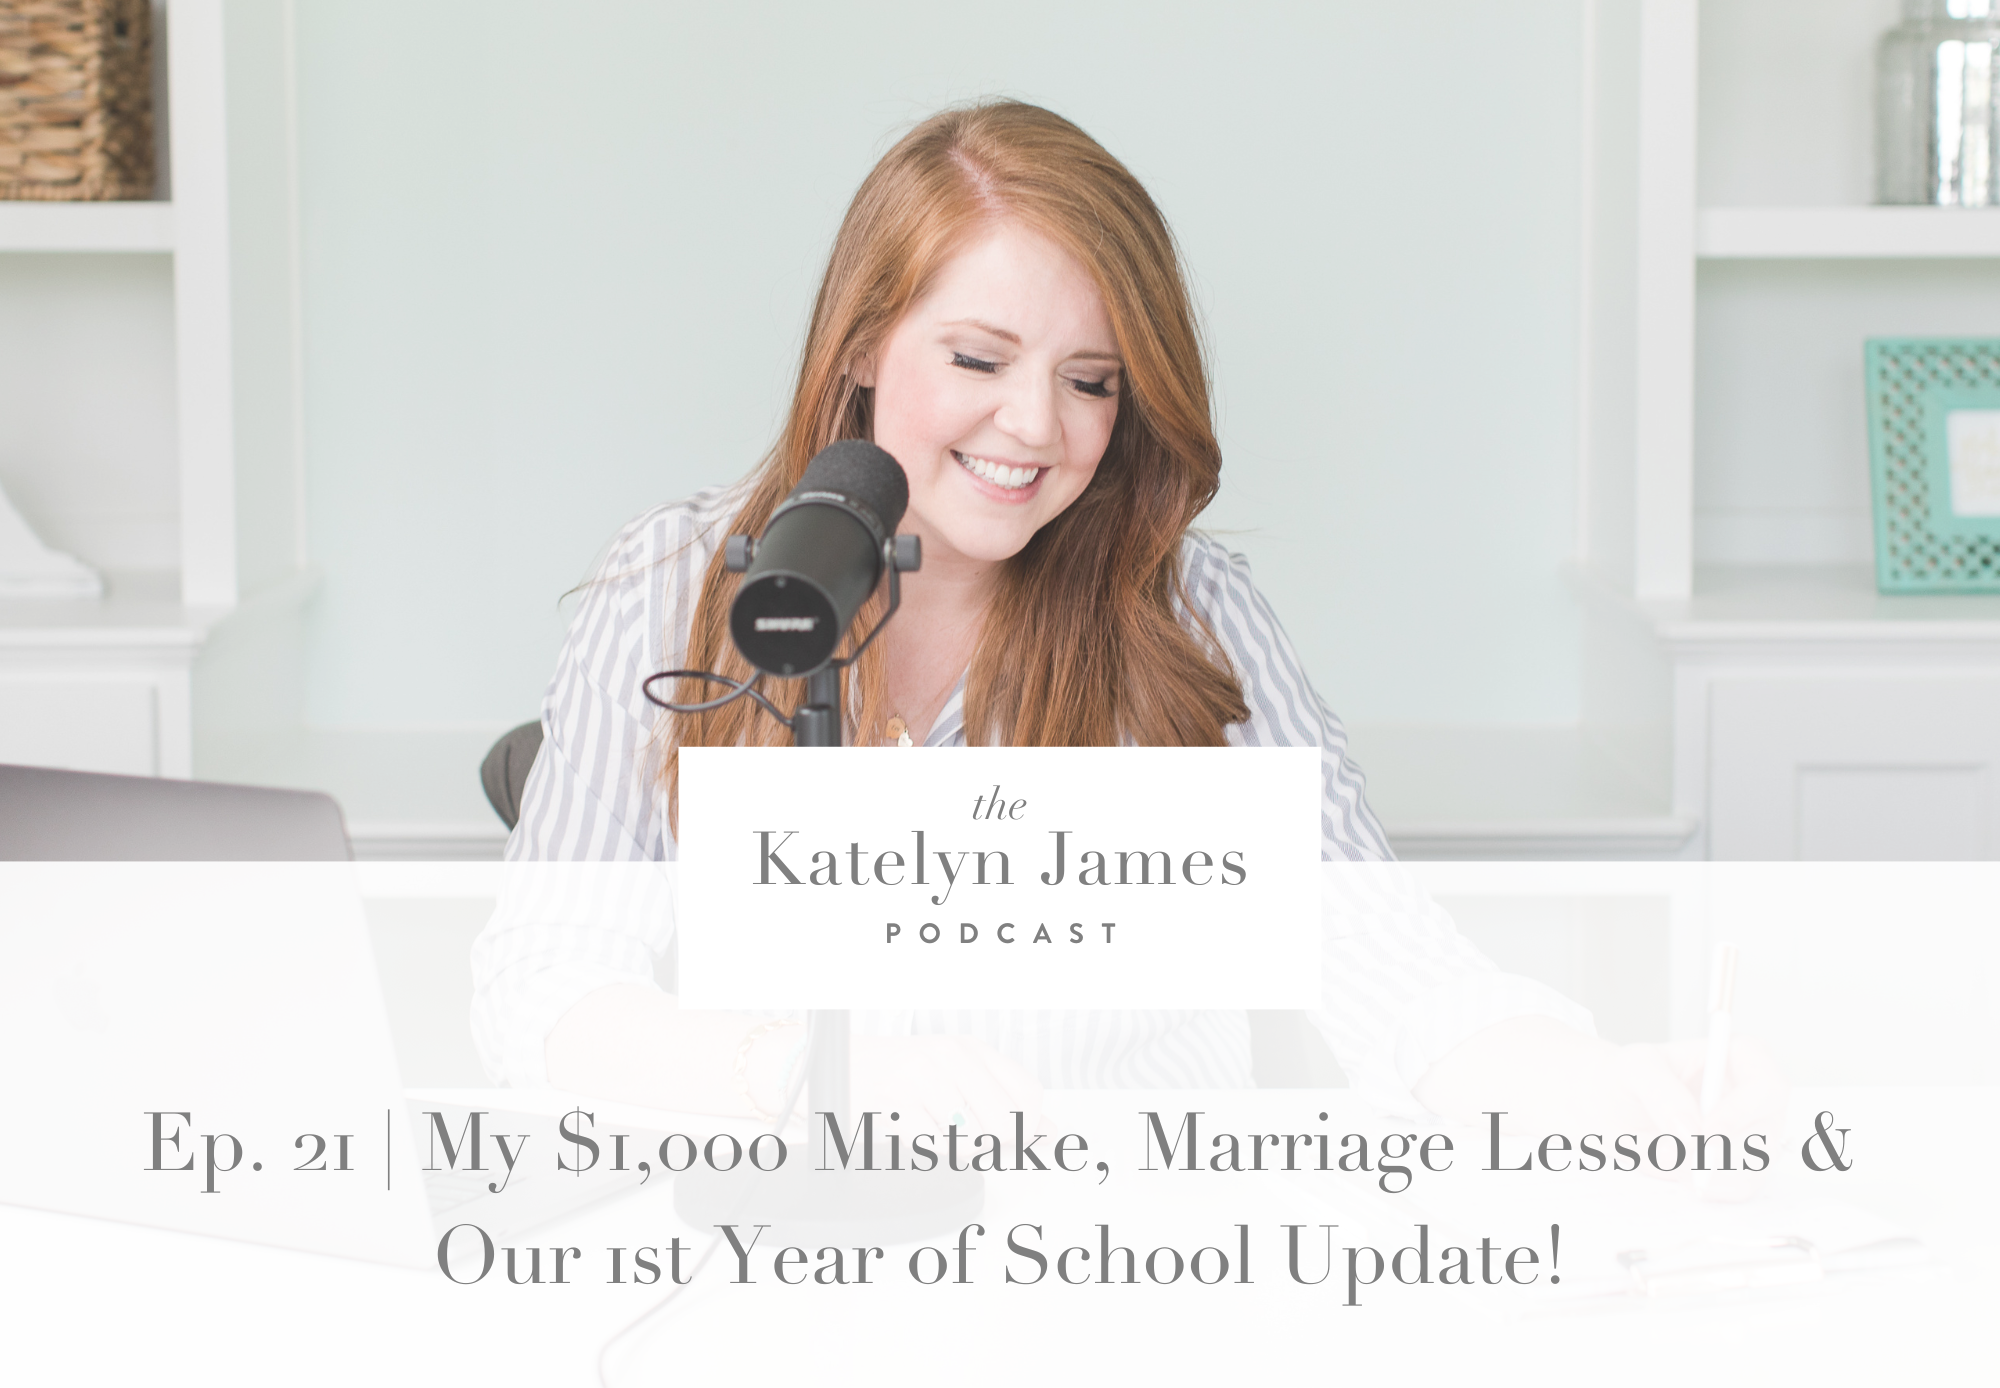 My $1,000 Mistake, Marriage Lessons & Our 1st Year of School Update!